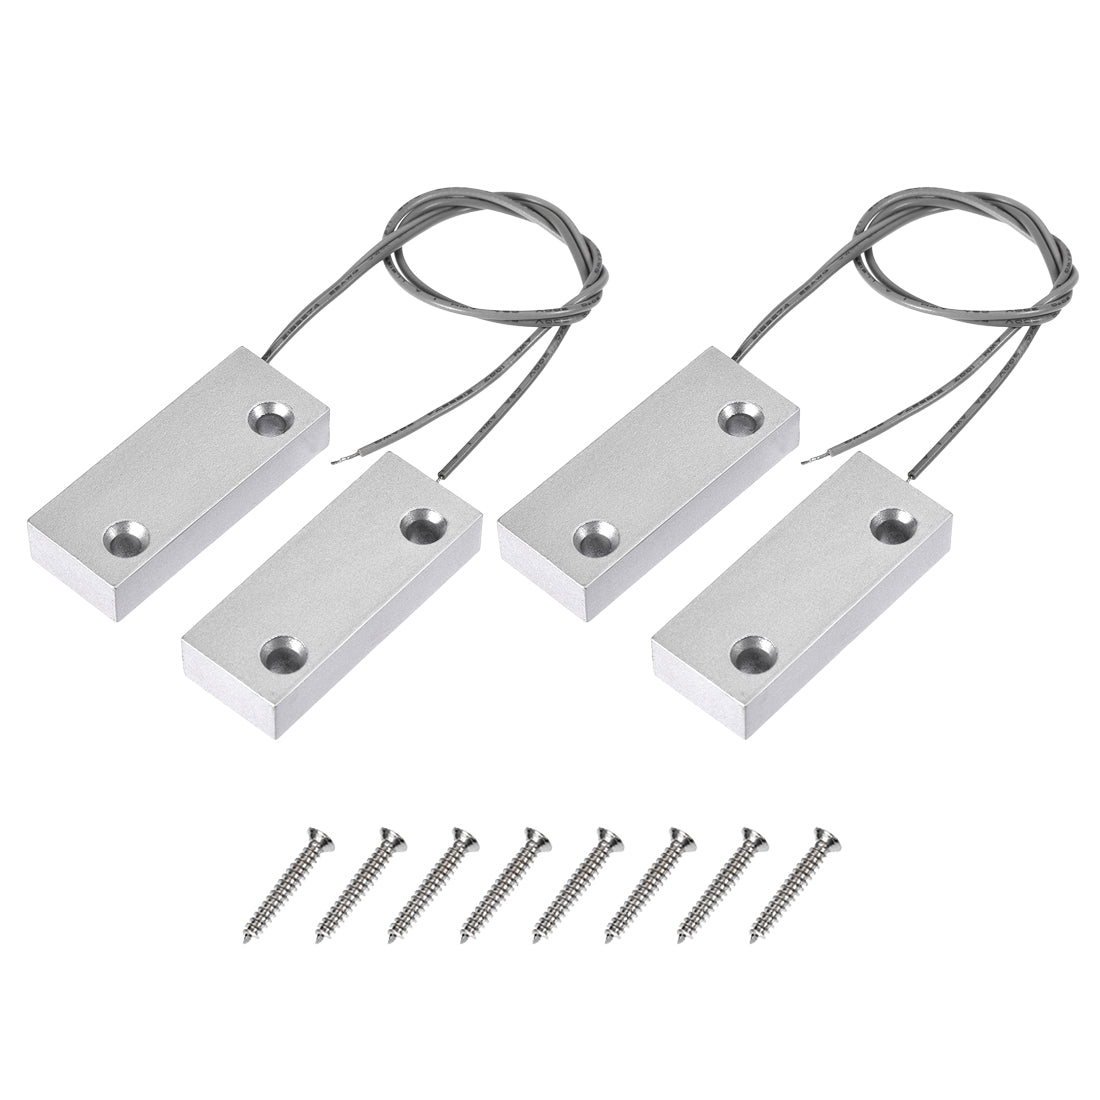 uxcell Uxcell MC-52 NO Rolling Gate Door Contact Magnetic Reed Switch 2Set